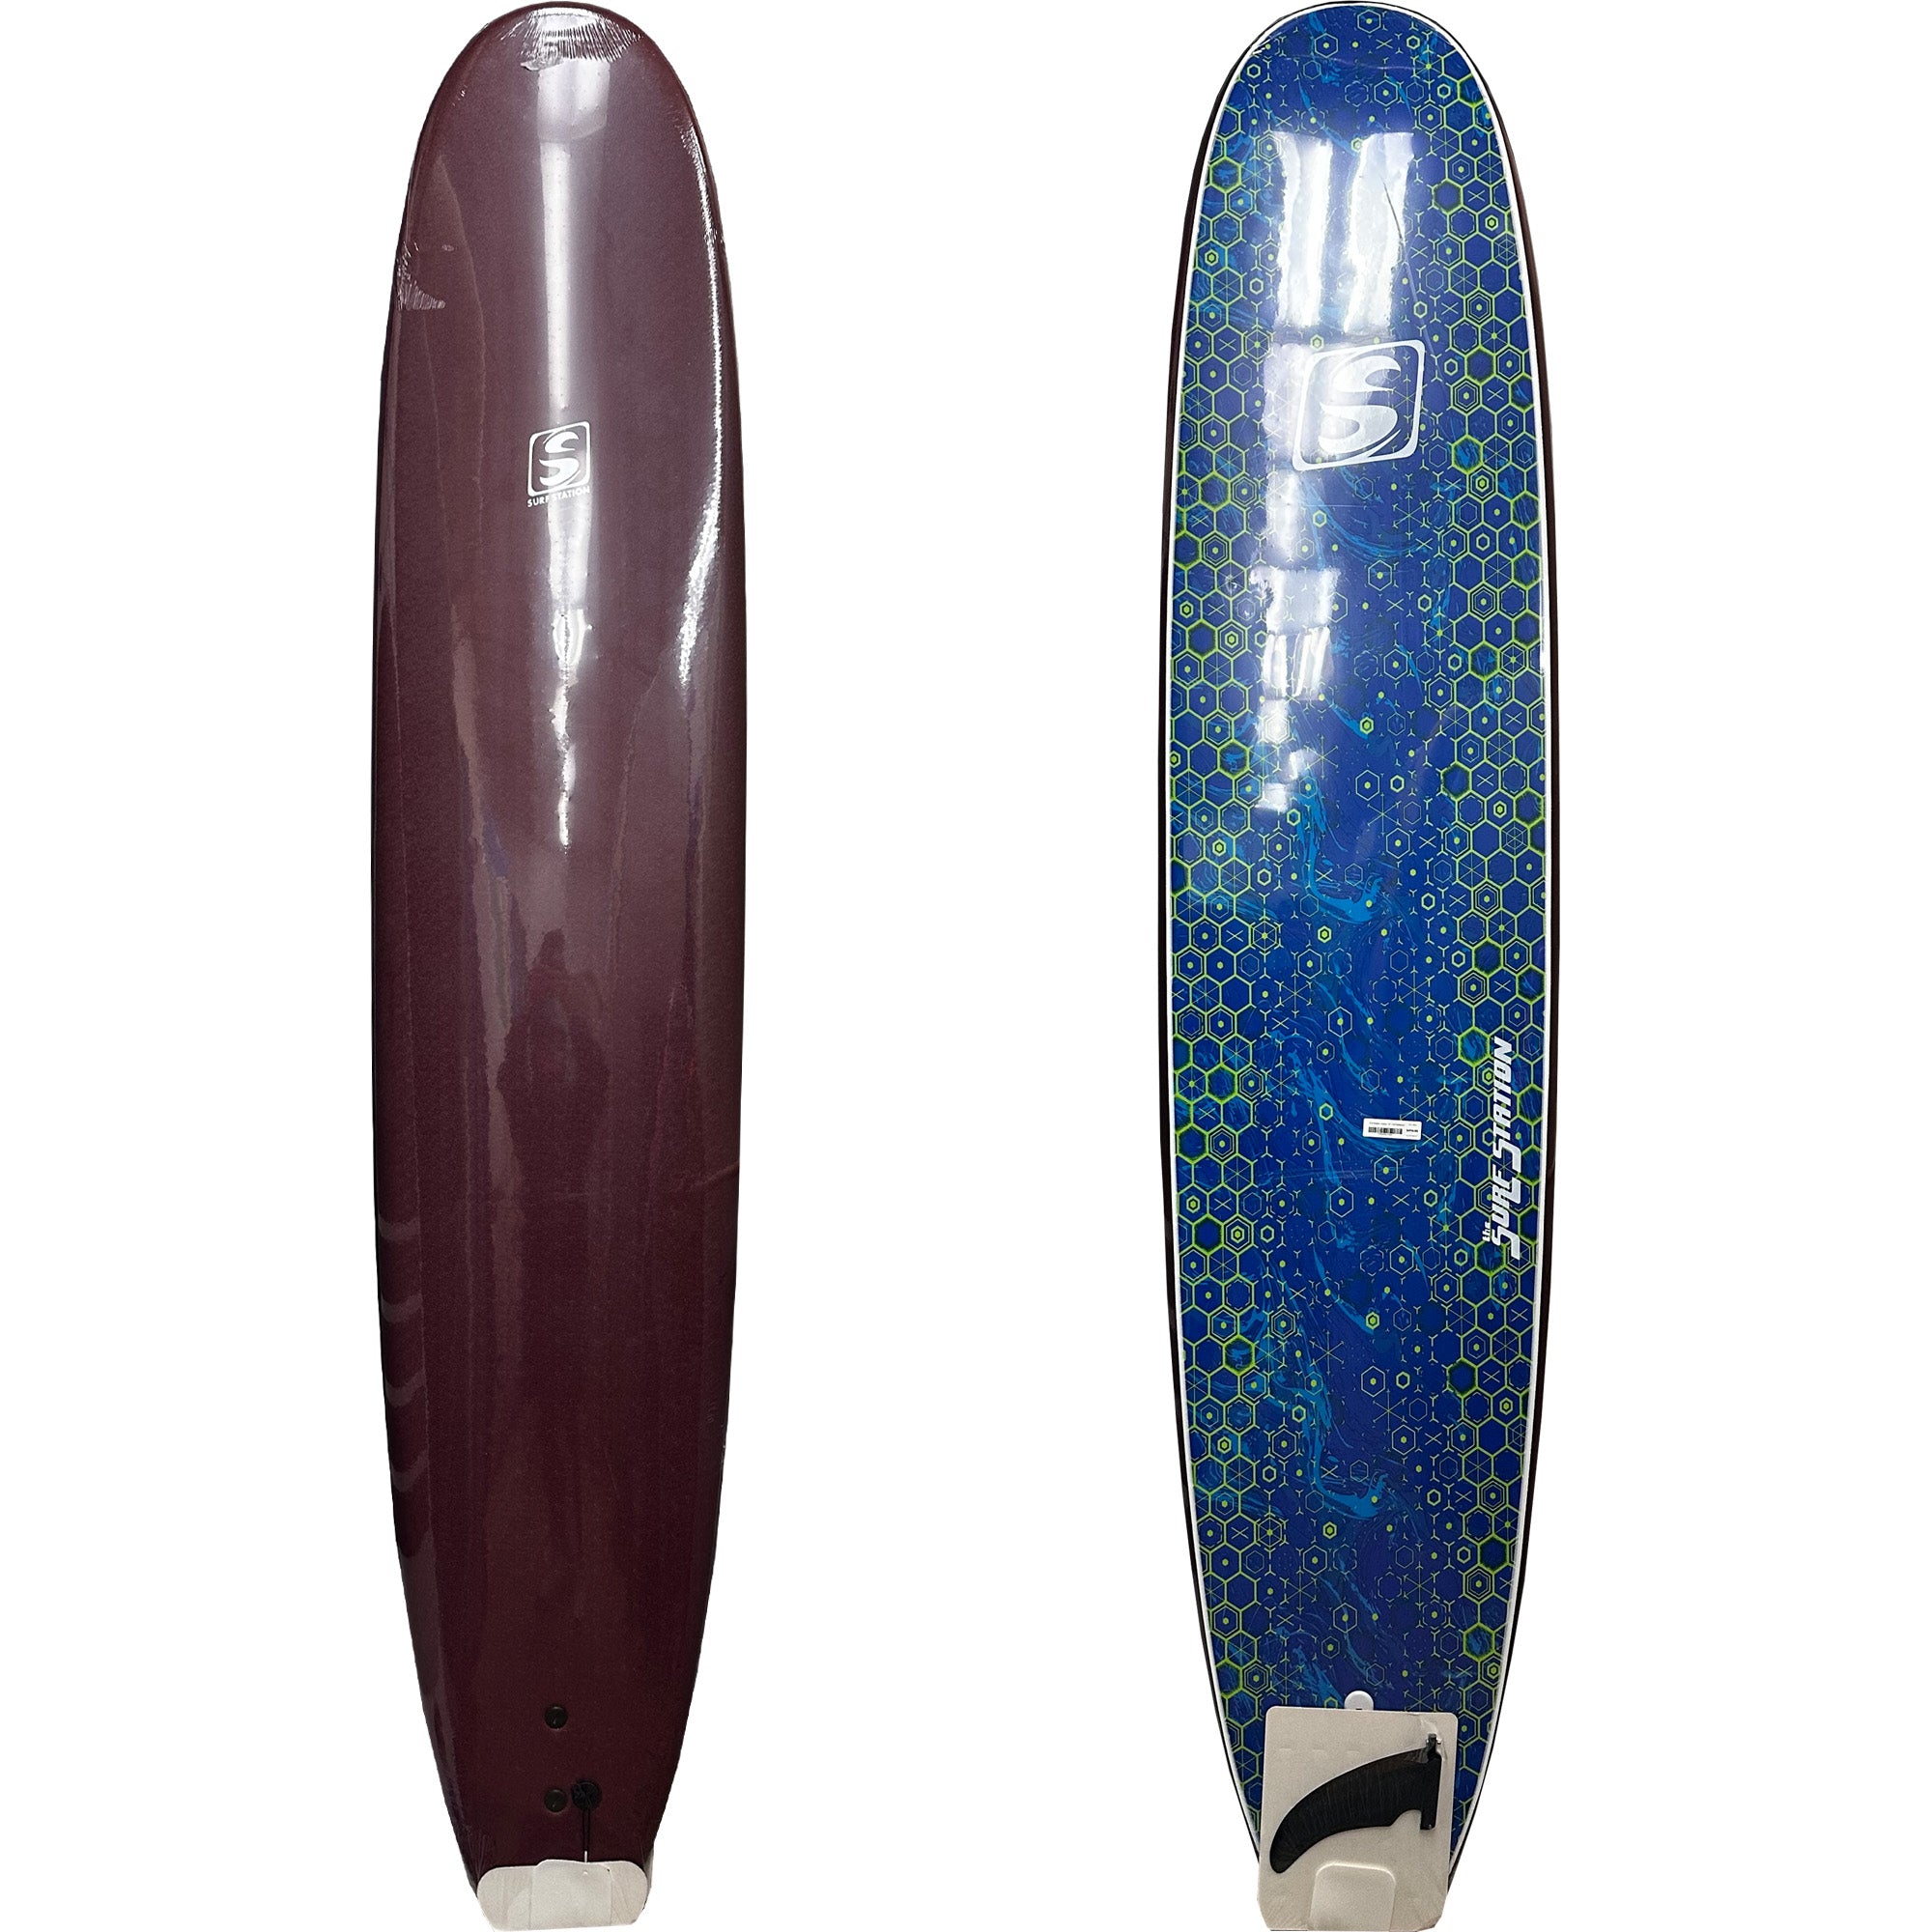 Surf Station Classic 10'0 Soft Surfboard